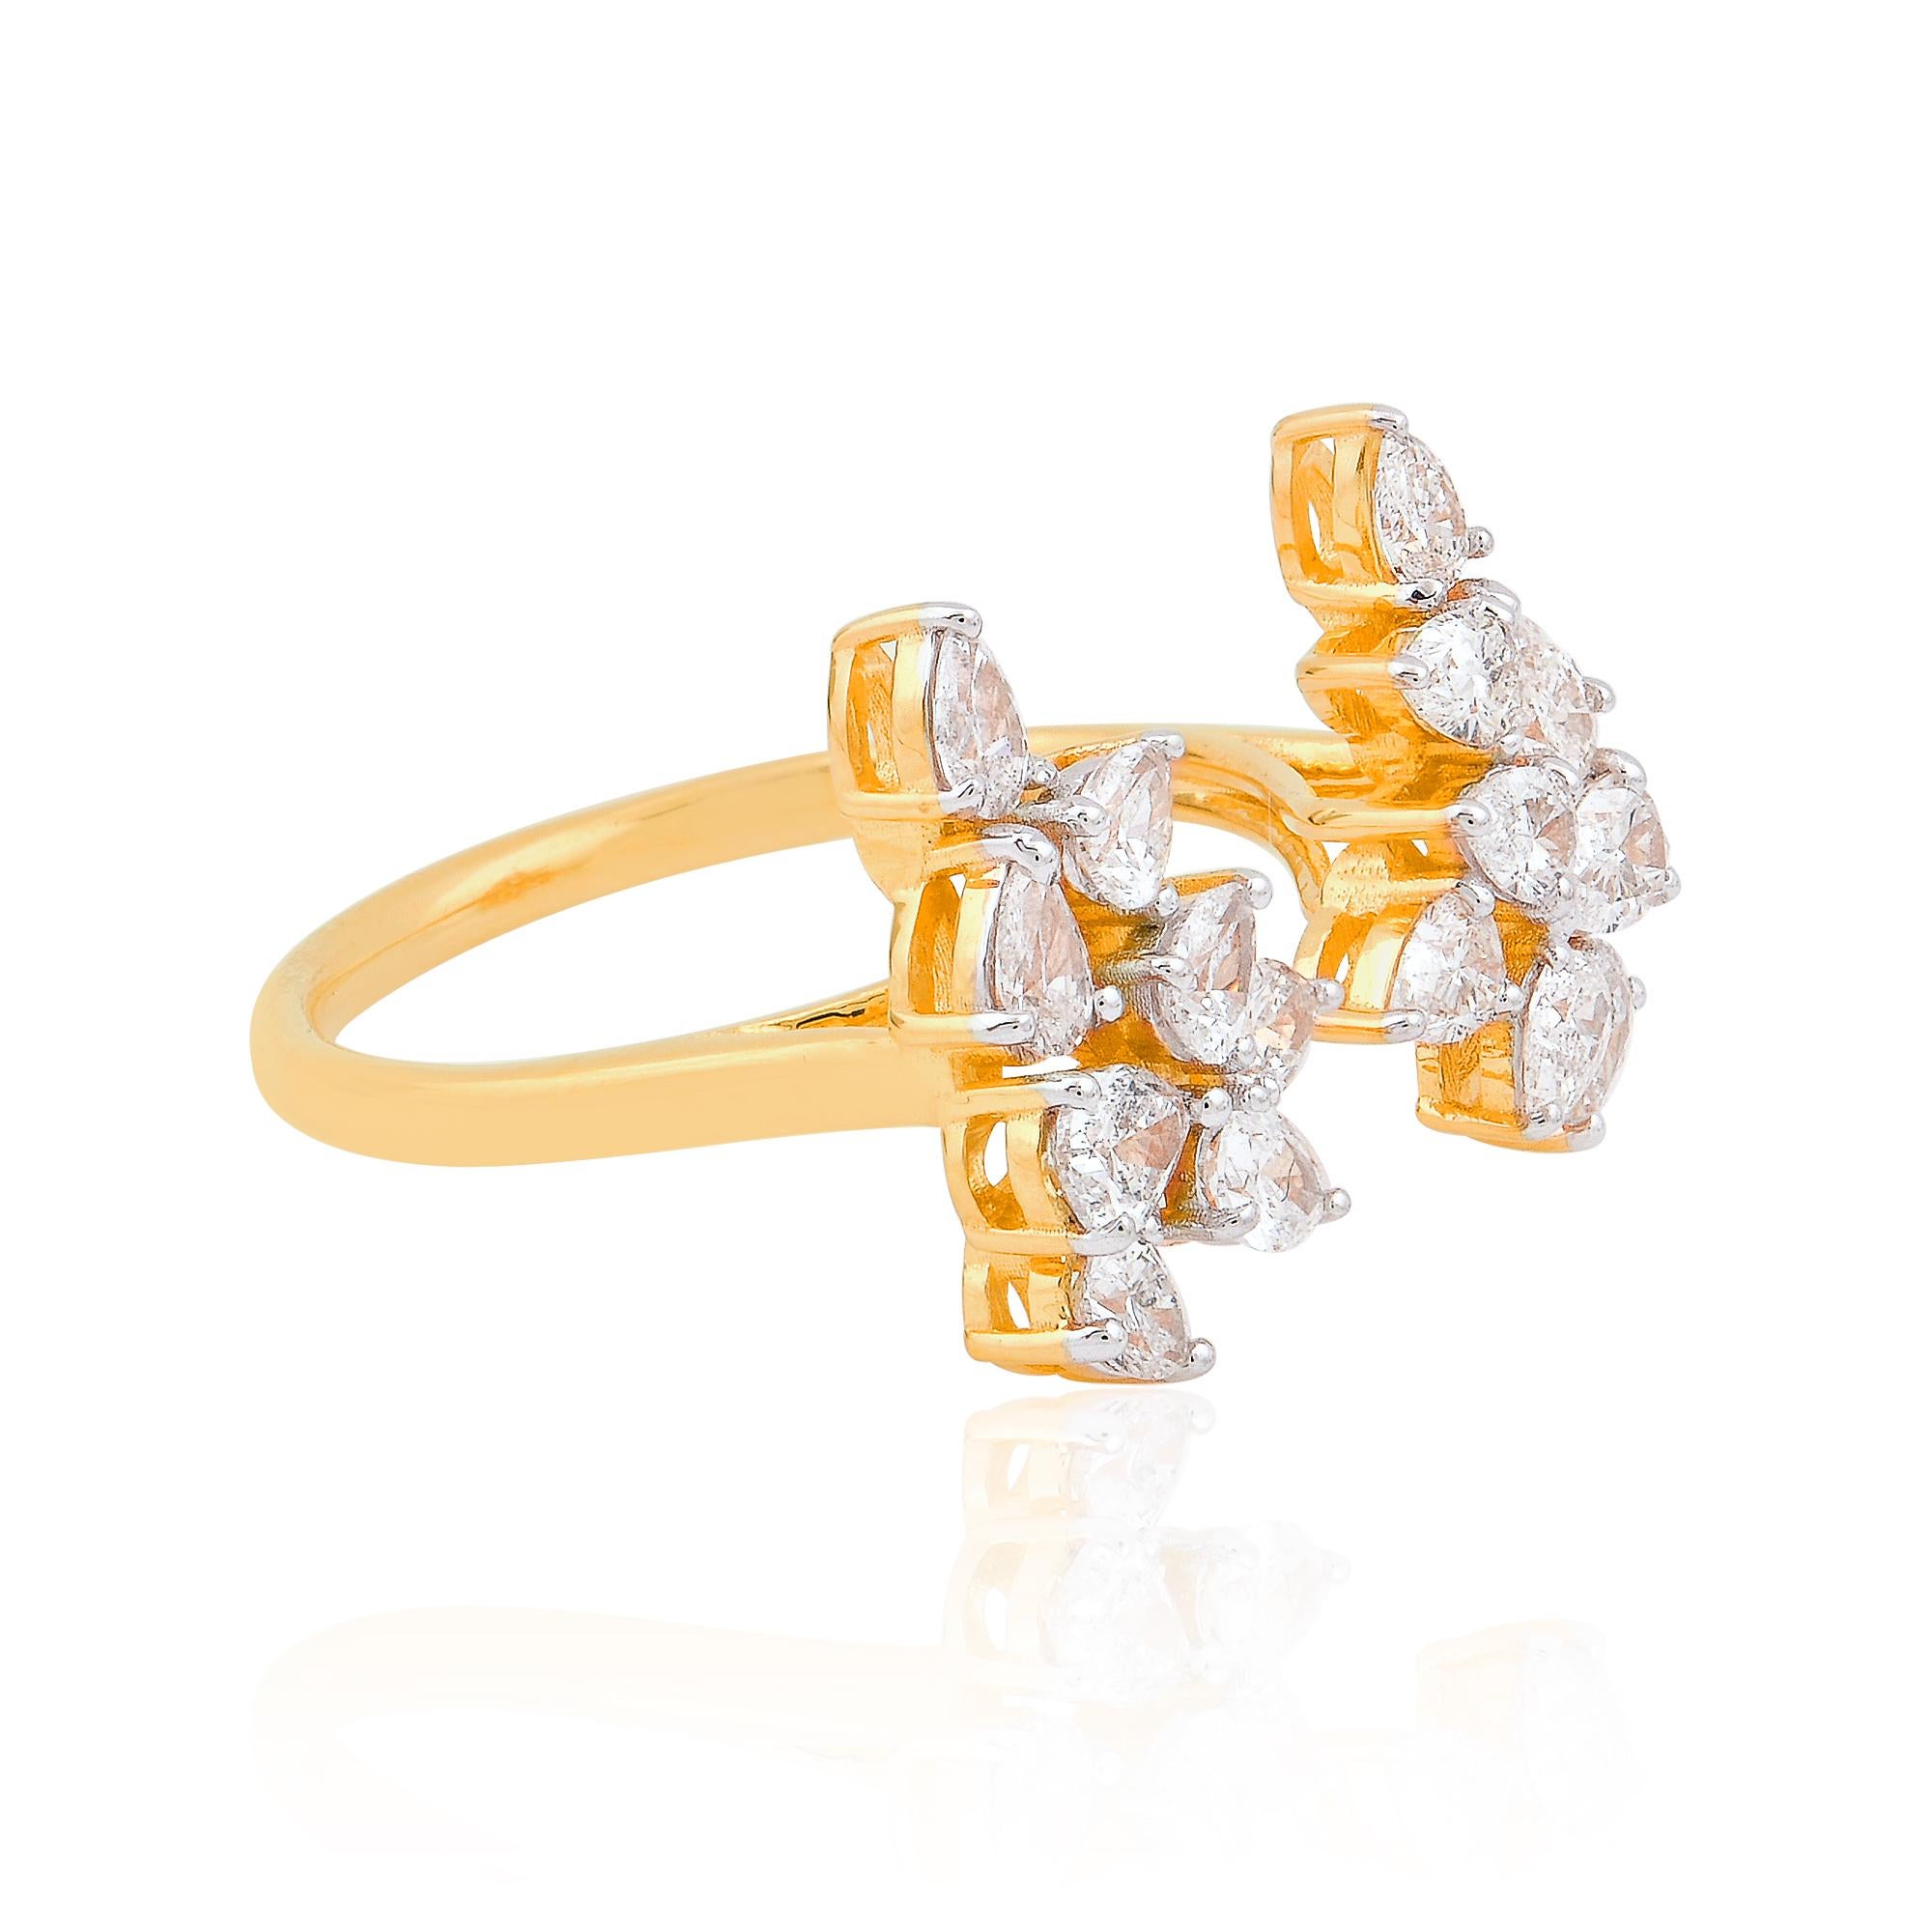 For Sale:  1.30 Carat SI Clarity HI Color Pear Diamond Cuff Ring 18k Yellow Gold Jewelry 2